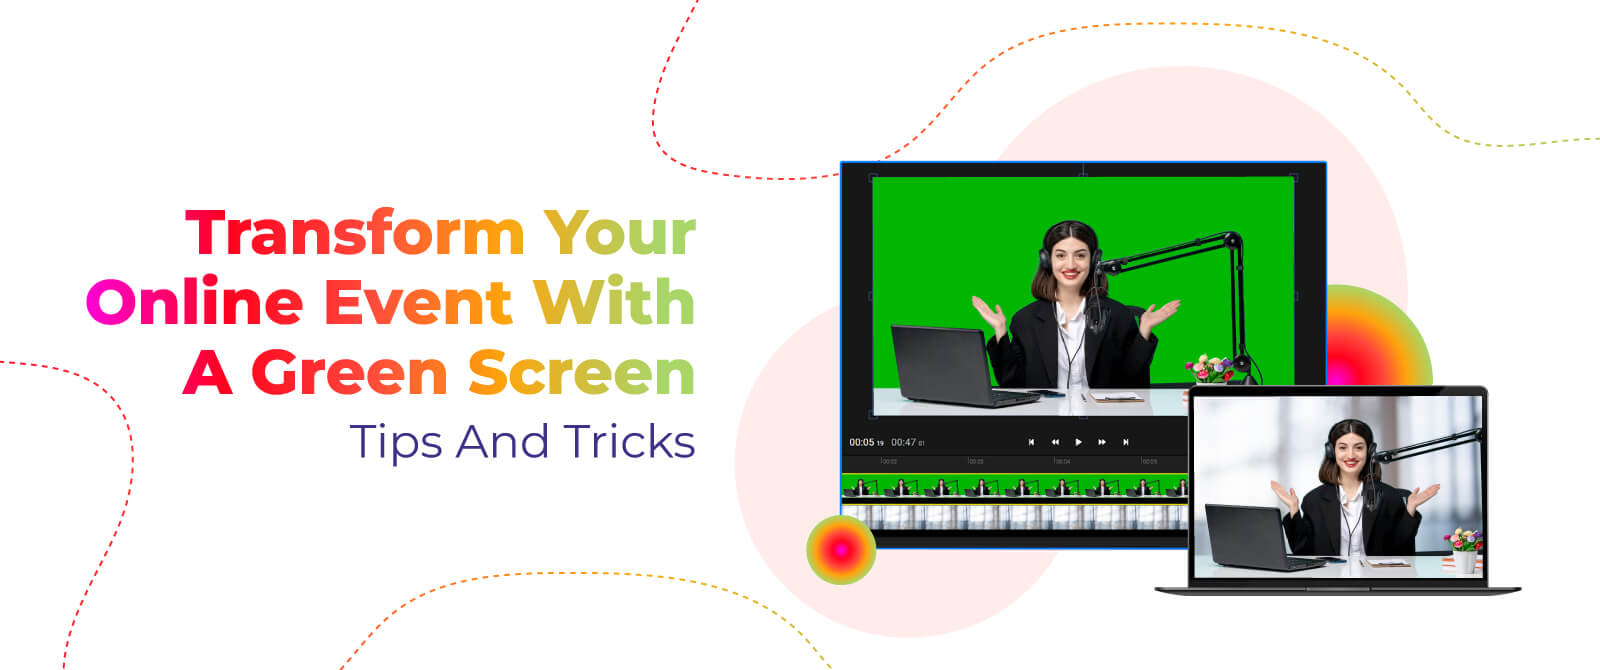 Transform Your Online Event with a Green Screen: Tips and Tricks